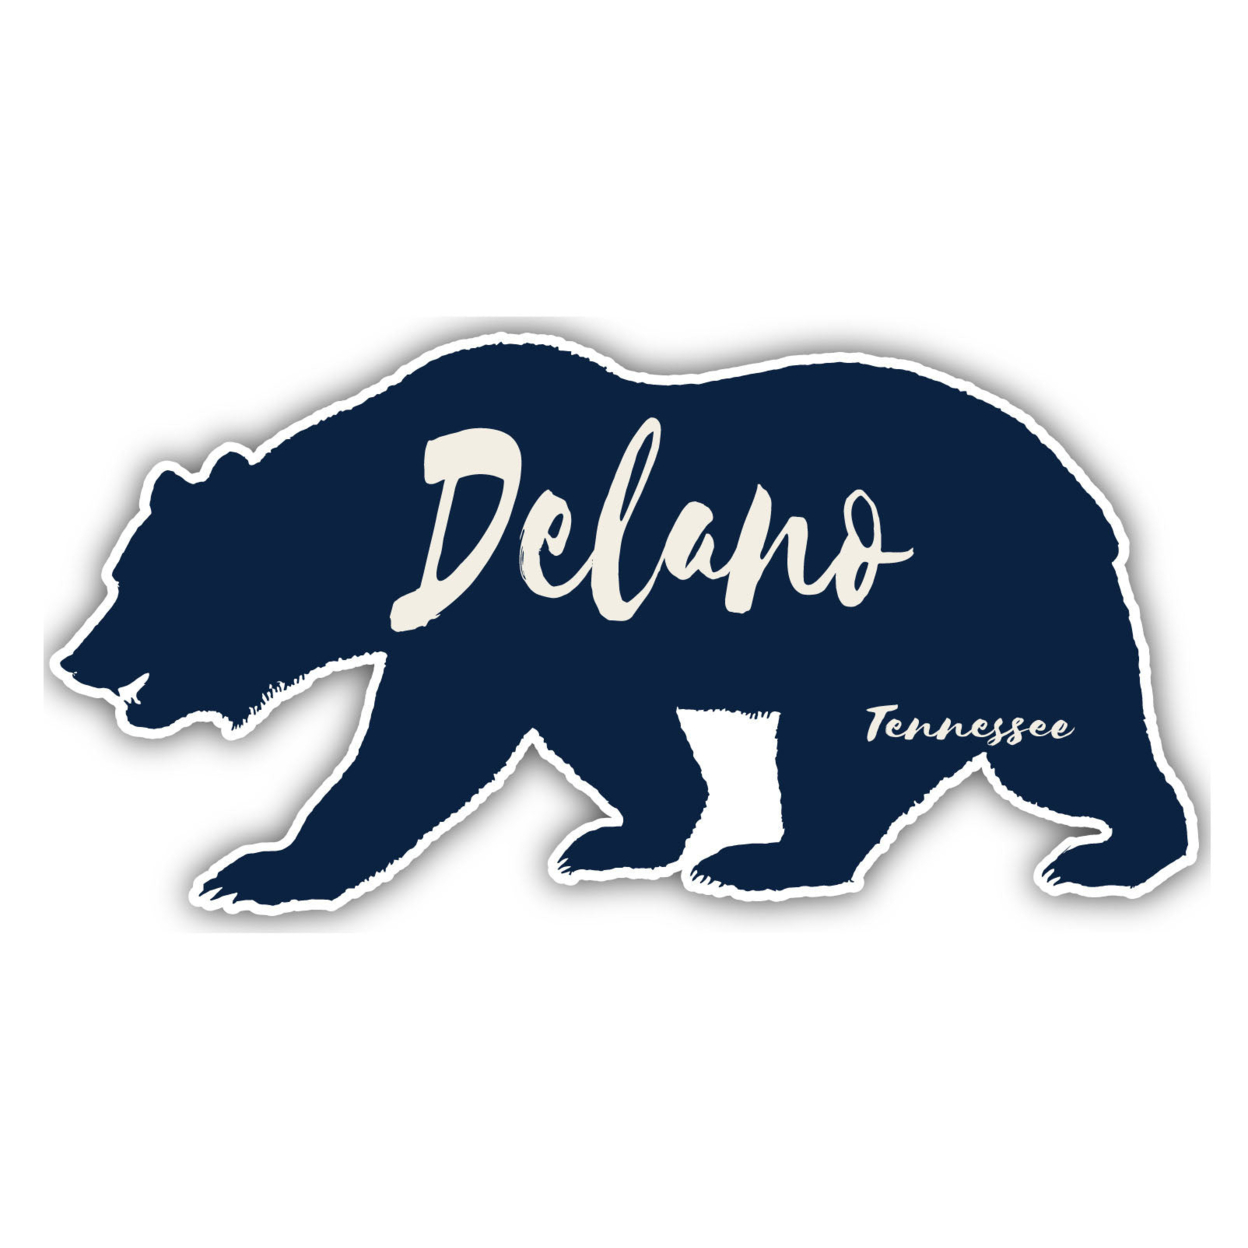 Delano Tennessee Souvenir Decorative Stickers (Choose Theme And Size) - 4-Pack, 10-Inch, Bear